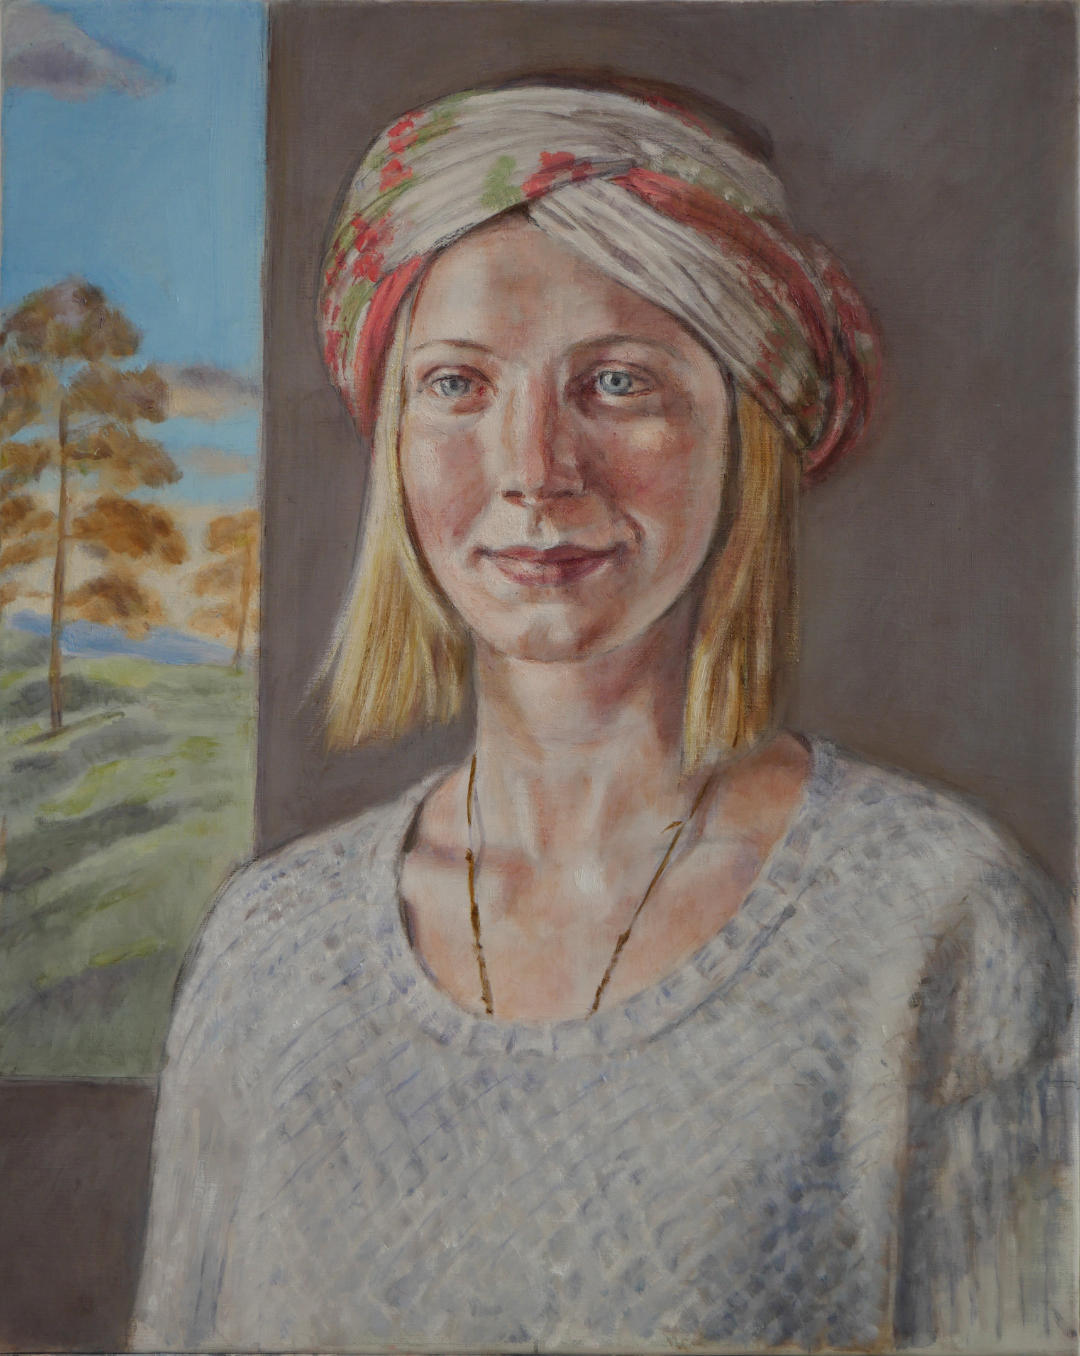 portrait painting of girl wearing a headscarf and woolly jumper, with colourful landscape in background